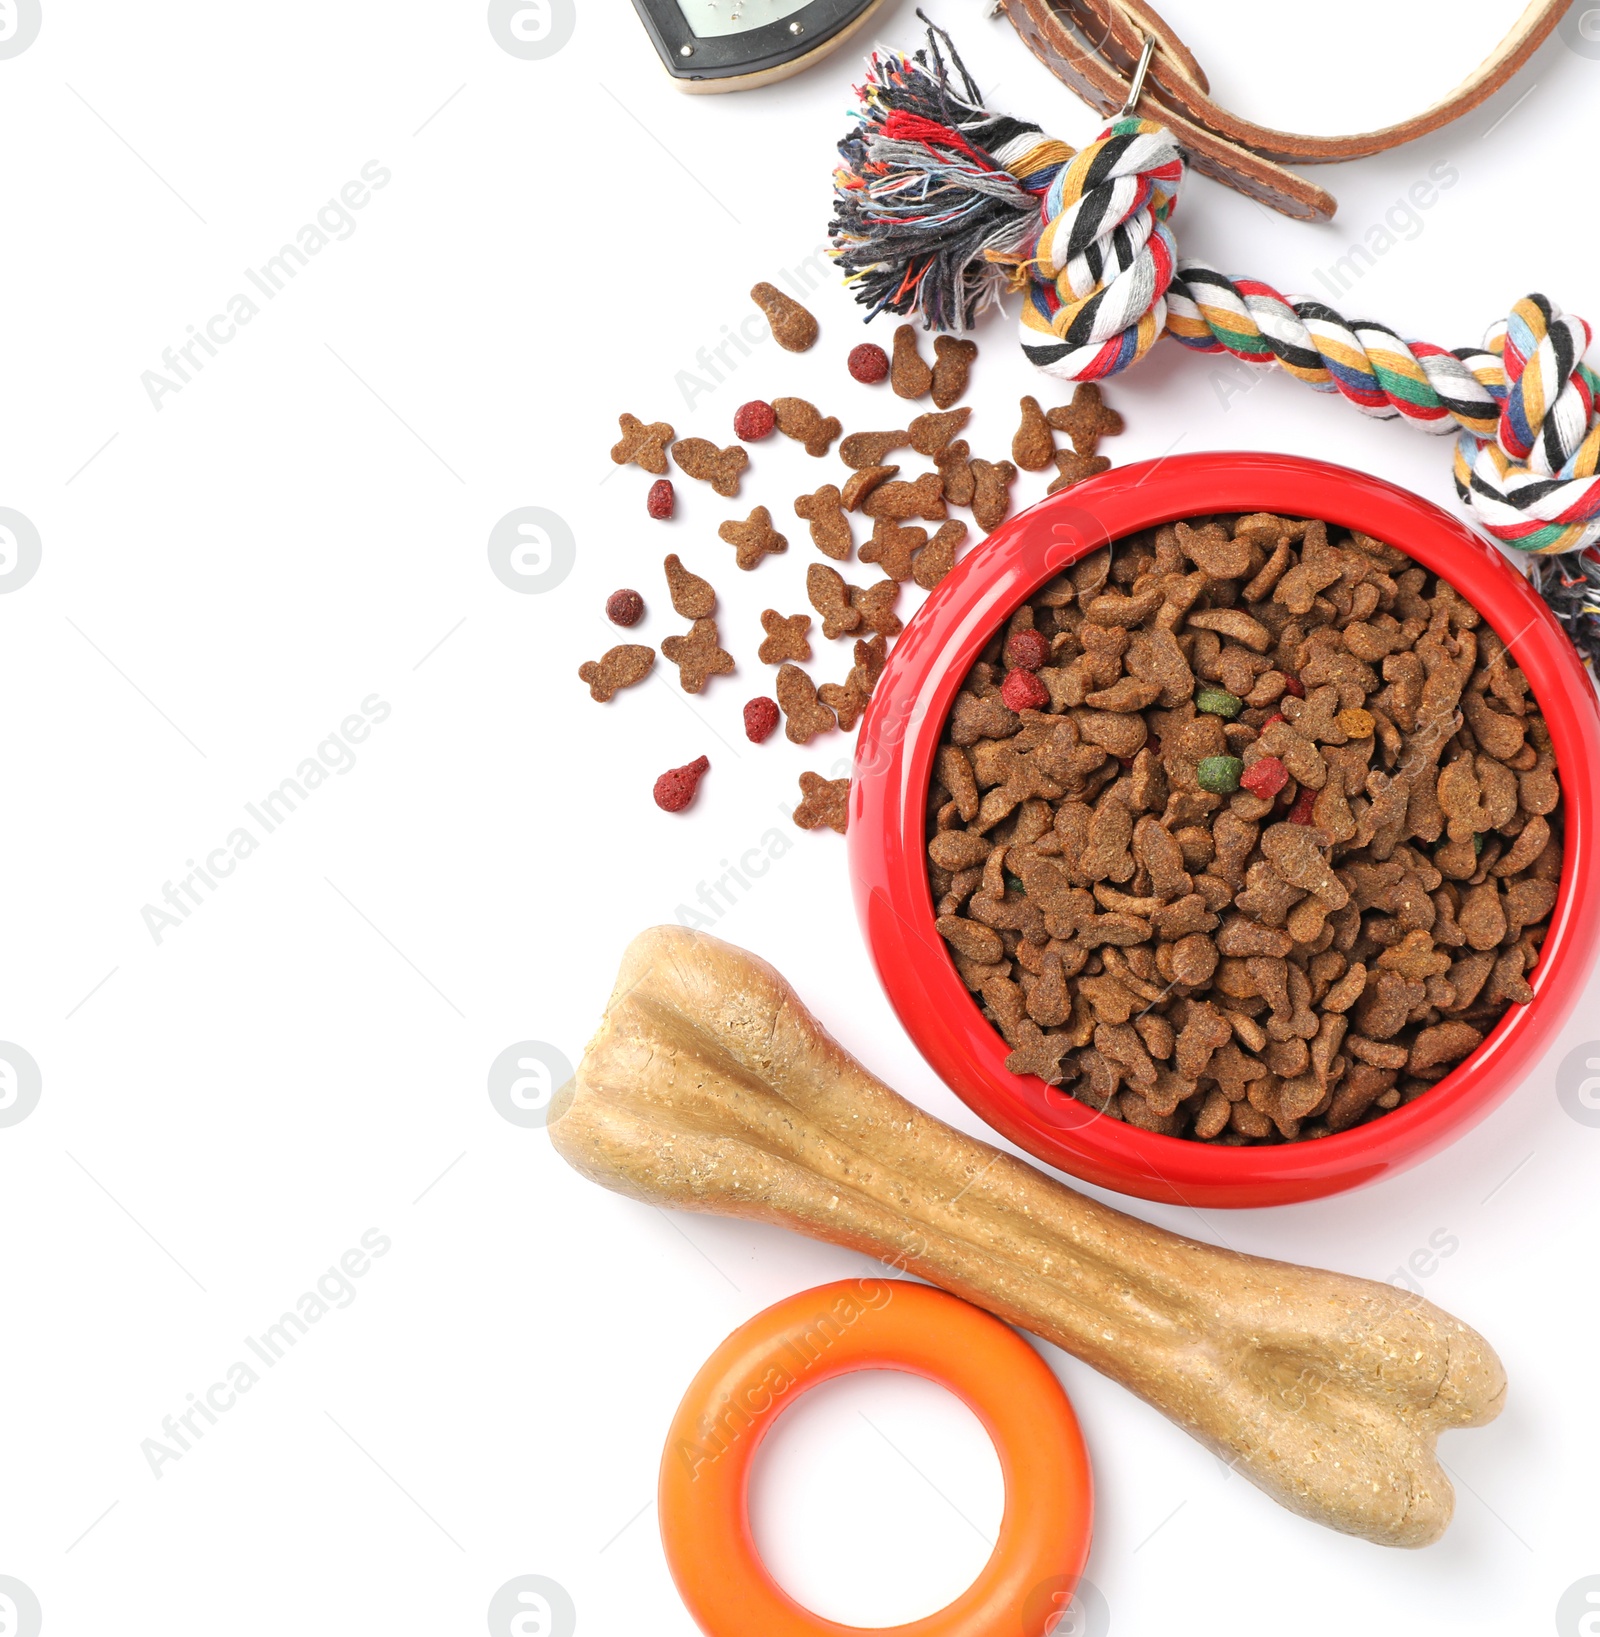 Photo of Bowl with food for dog and accessories on white background. Pet care